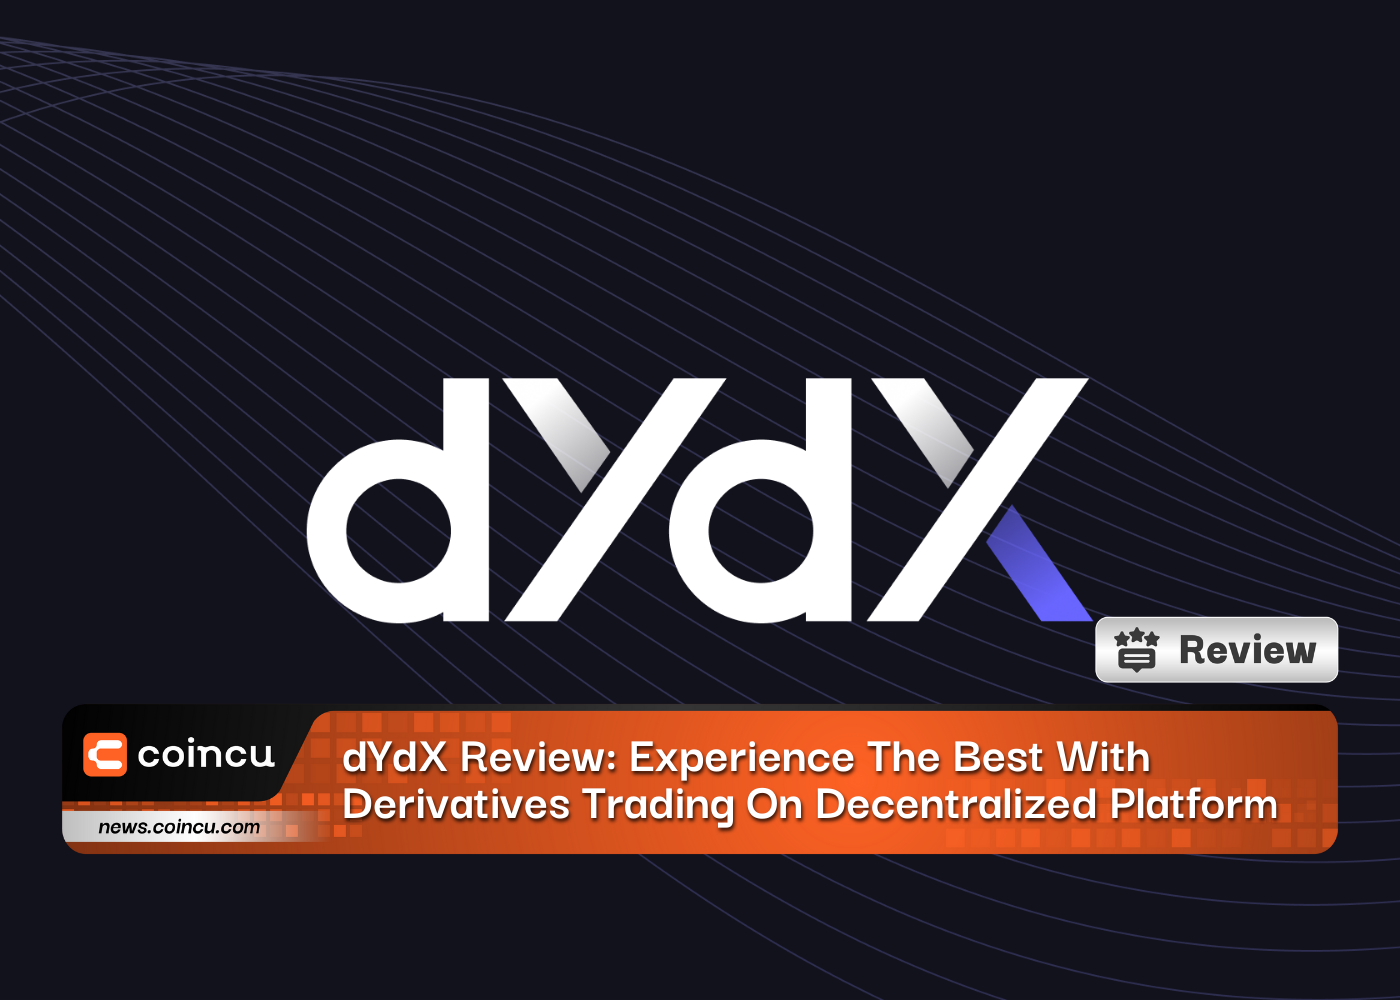 dYdX Review: Experience The Best With Derivatives Trading On Decentralized Platform